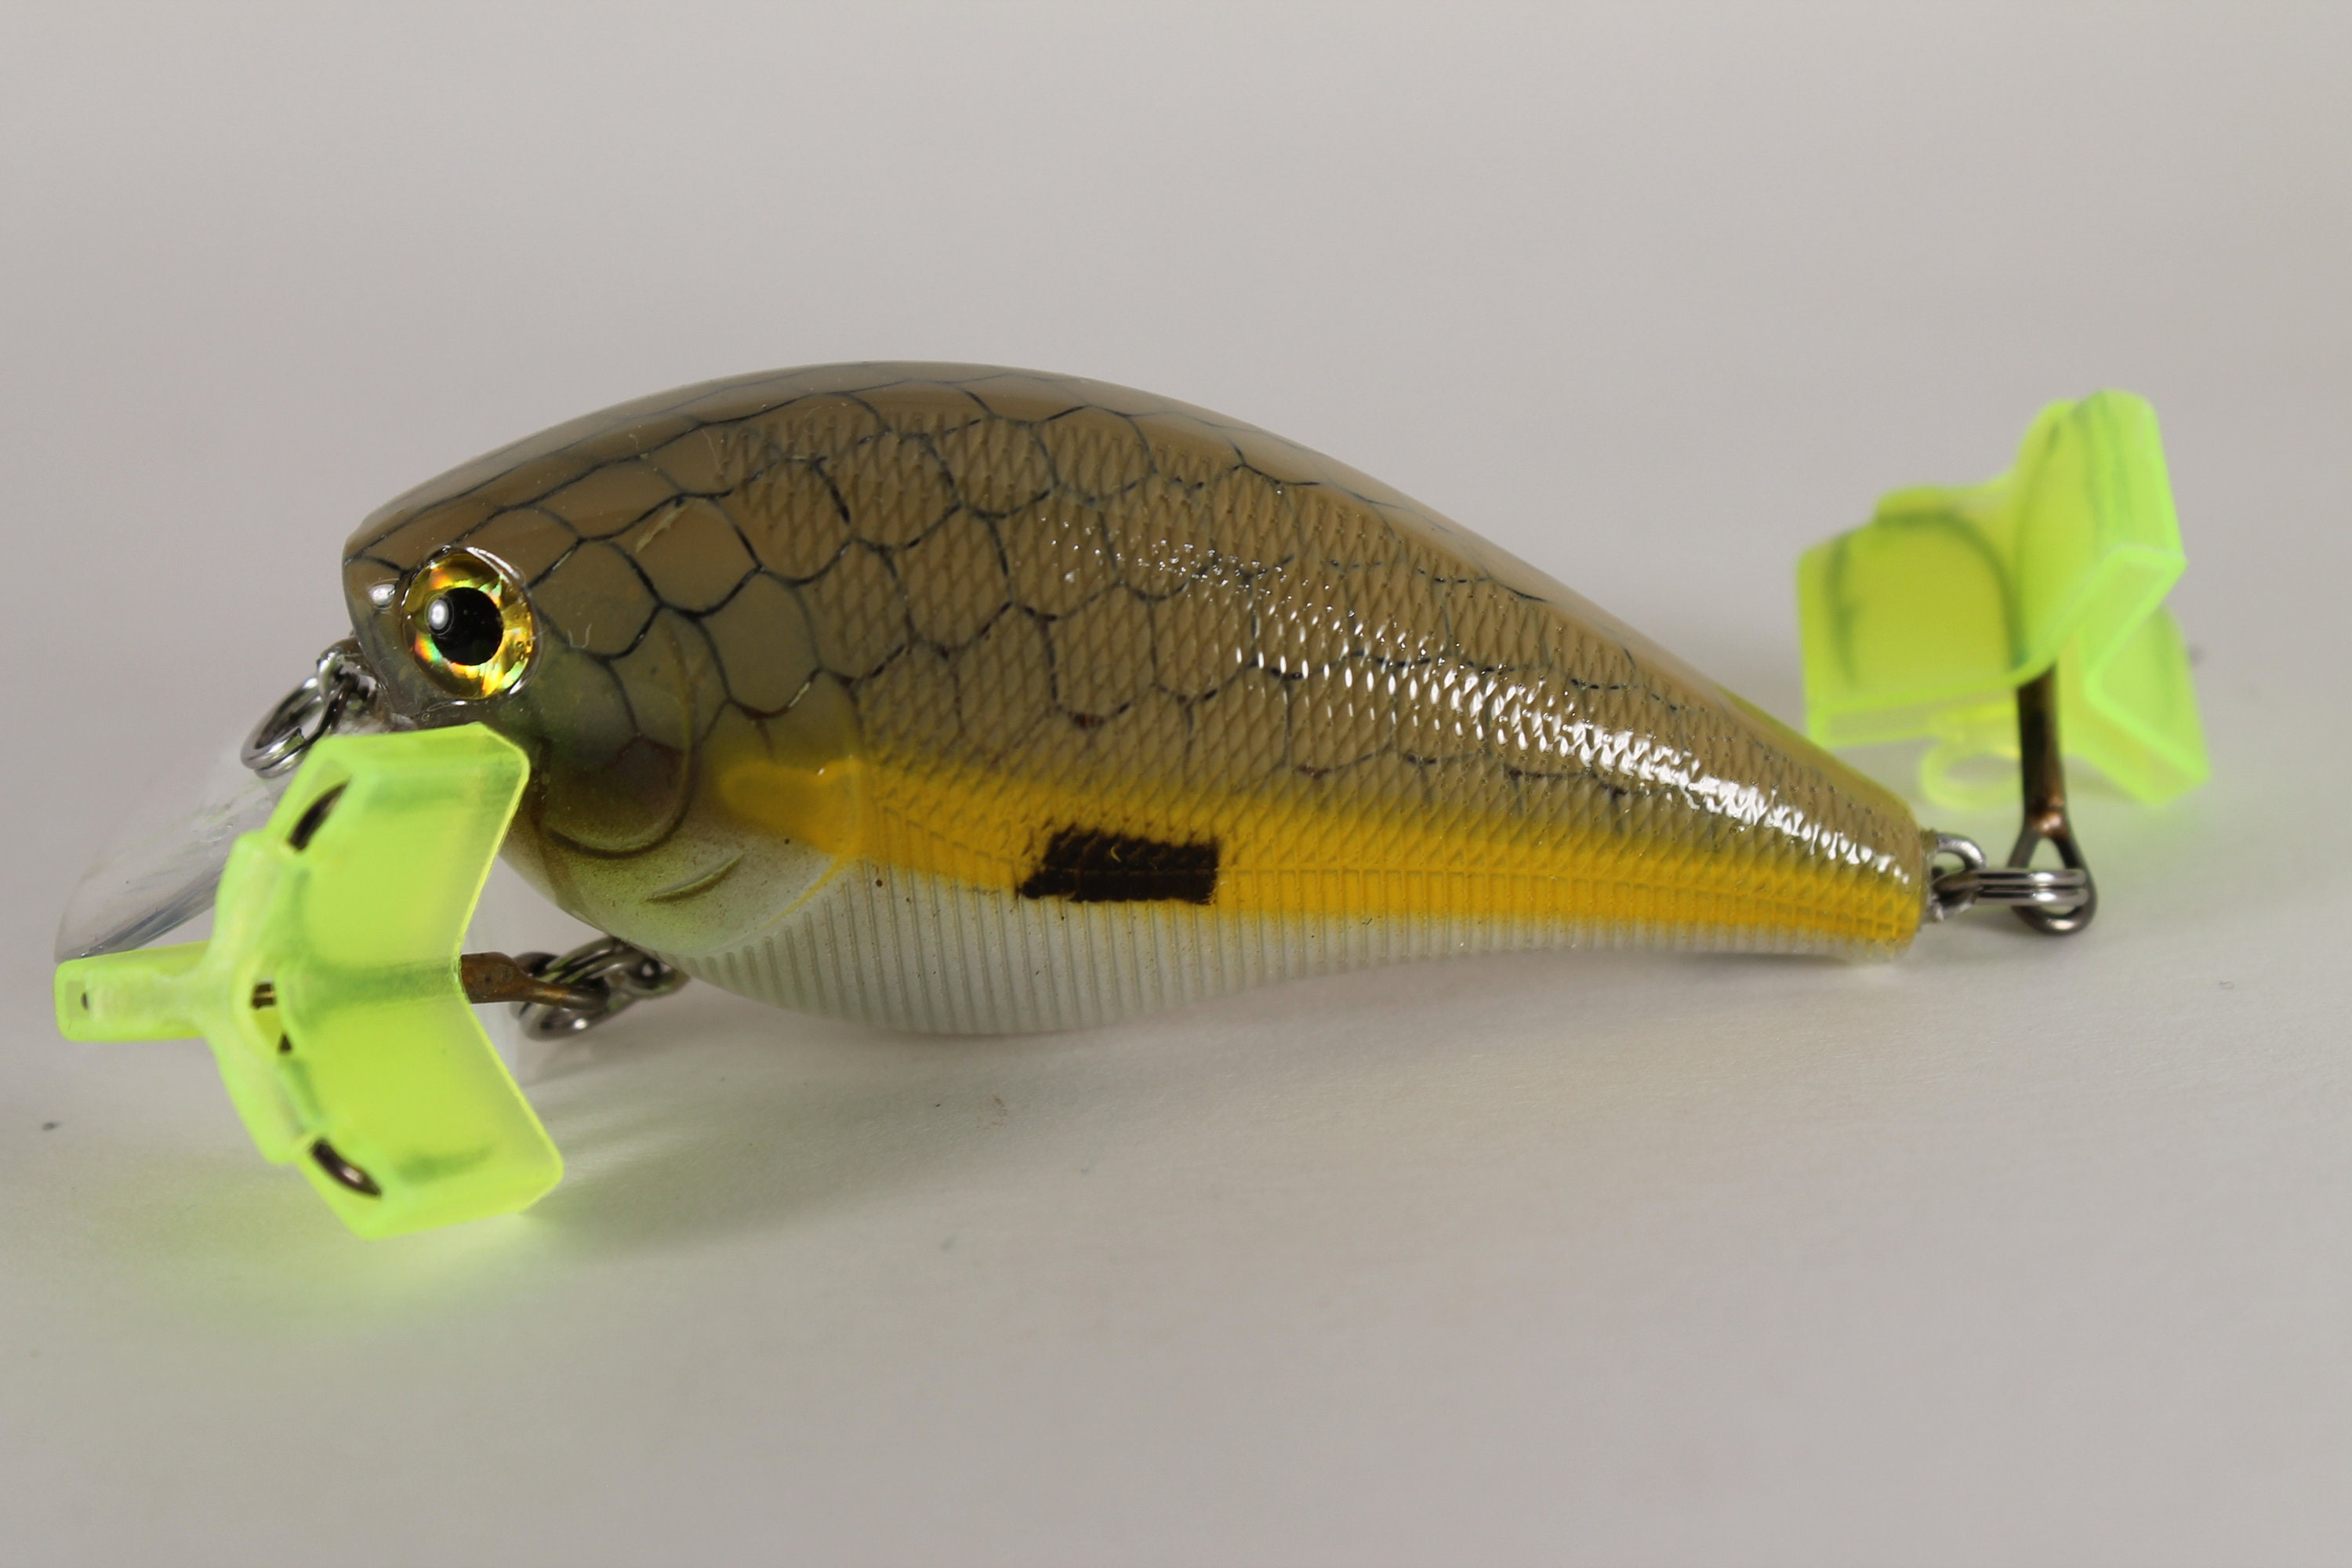 Custom Painted Lures 2.5 Crankbait Crawfish Colored, Fishing Lures, Bass  Lures. Lures. 